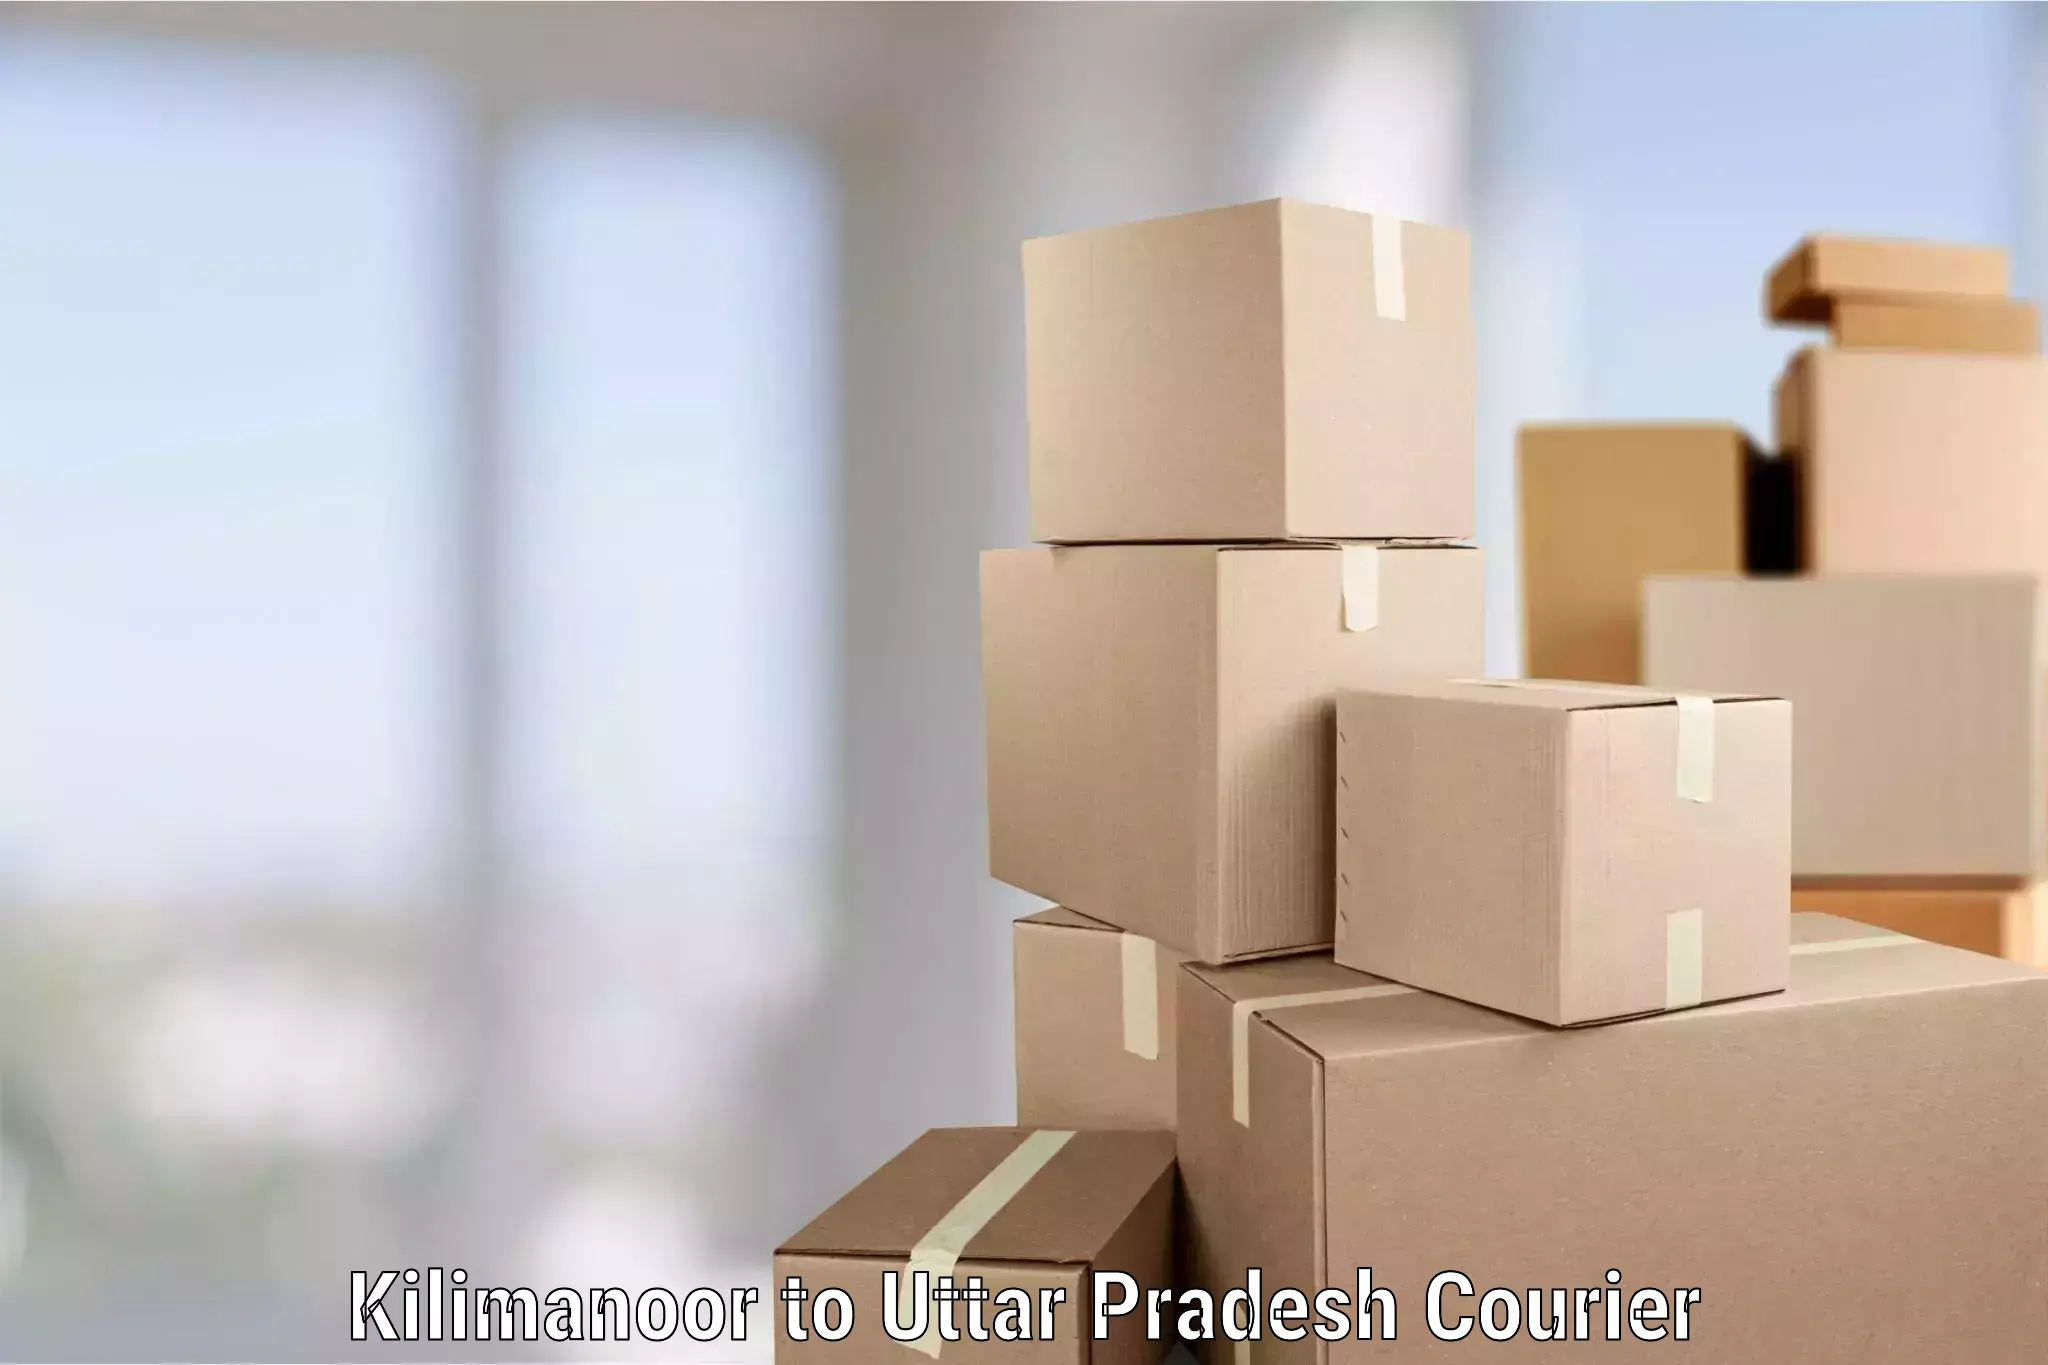 Stress-free household moving Kilimanoor to Kanpur